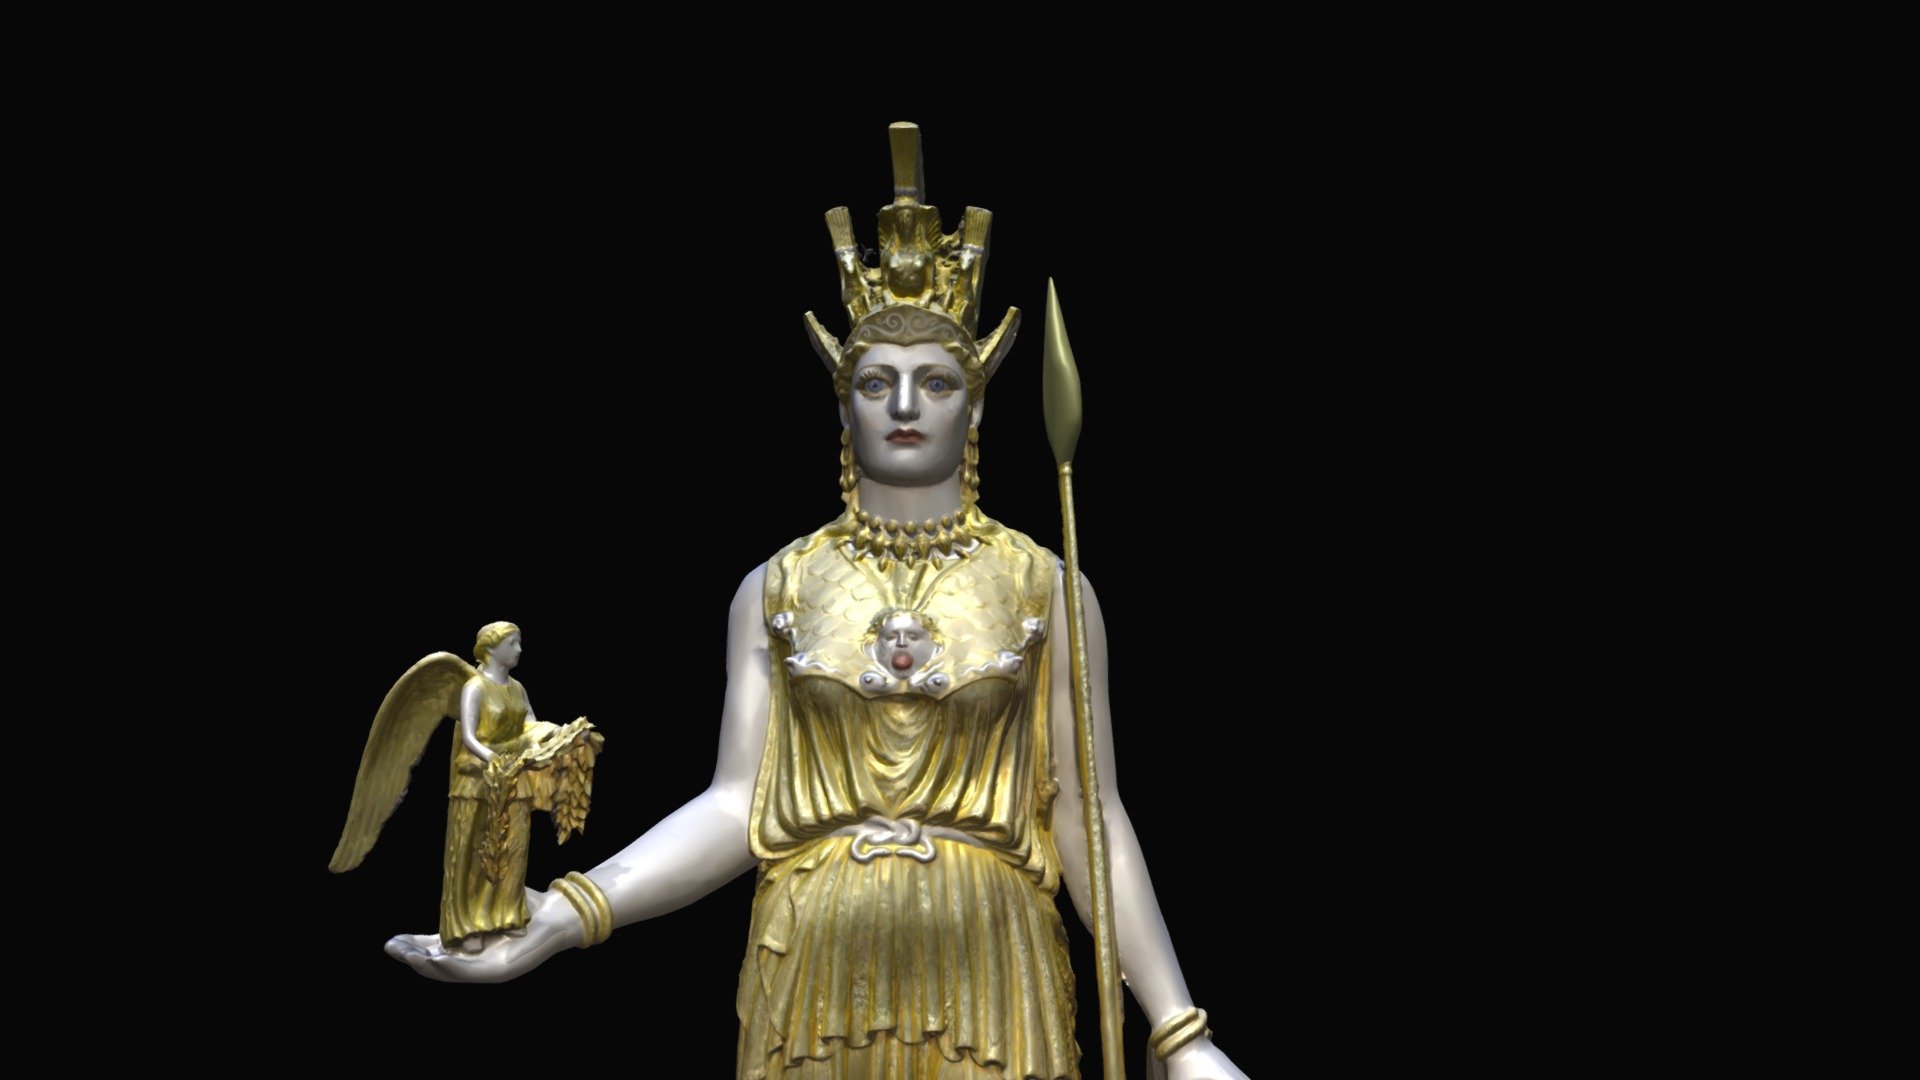 A model of Alan LeQuire's statue of Athena in the Parthenon in Nashville, TN. Made from photographs shot by Matthew R. Brennan, processed in Photoscan, and edited with Zbrush 3d model